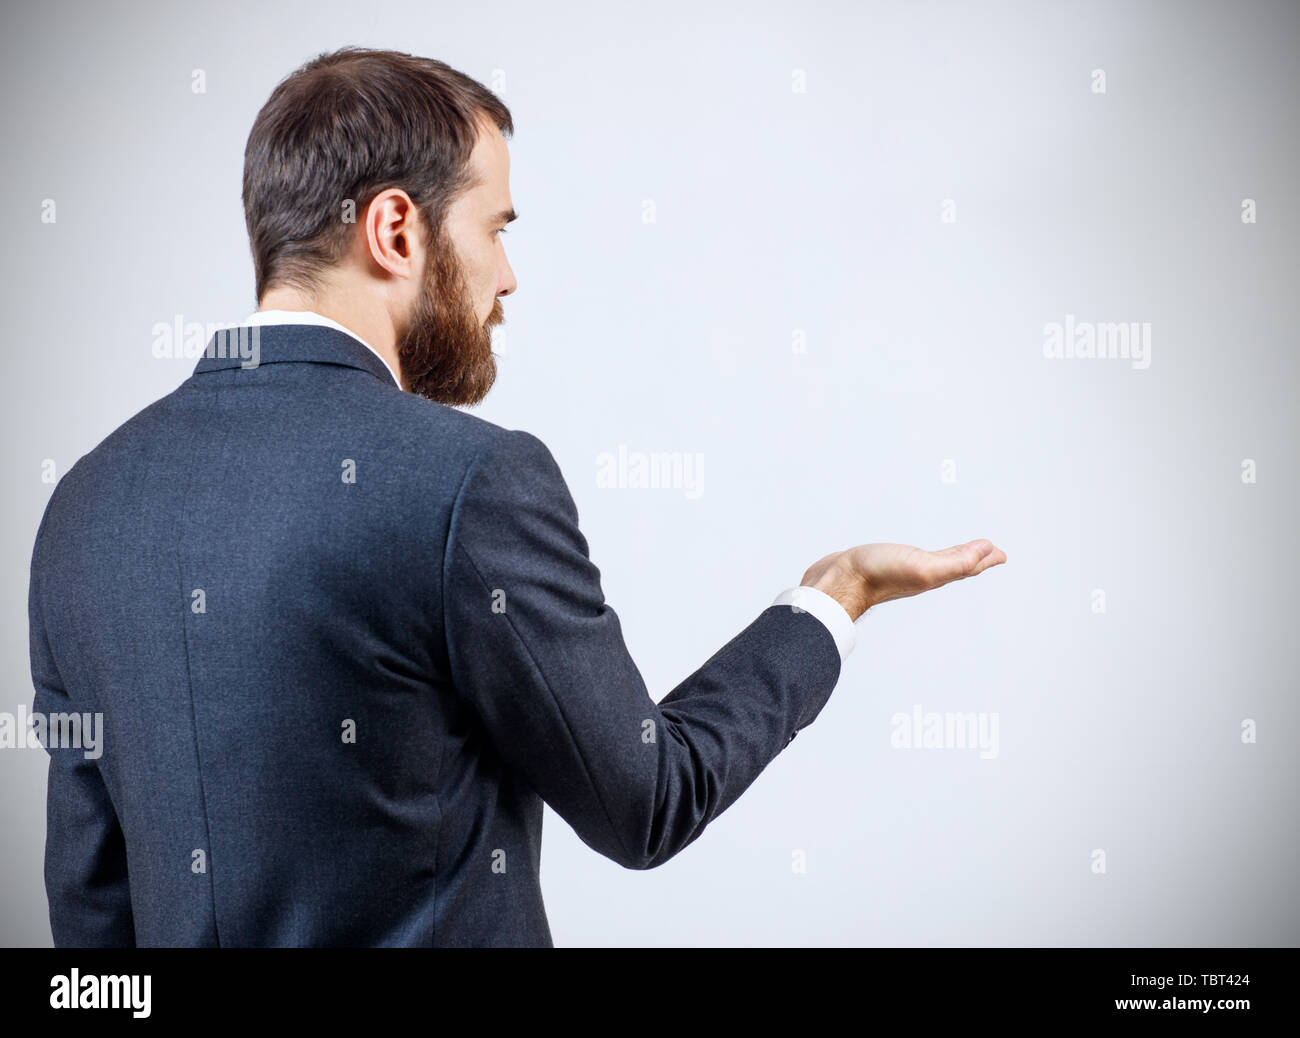 Businessman in suit standing and shows outstretched hand with open palm. Stock Photo